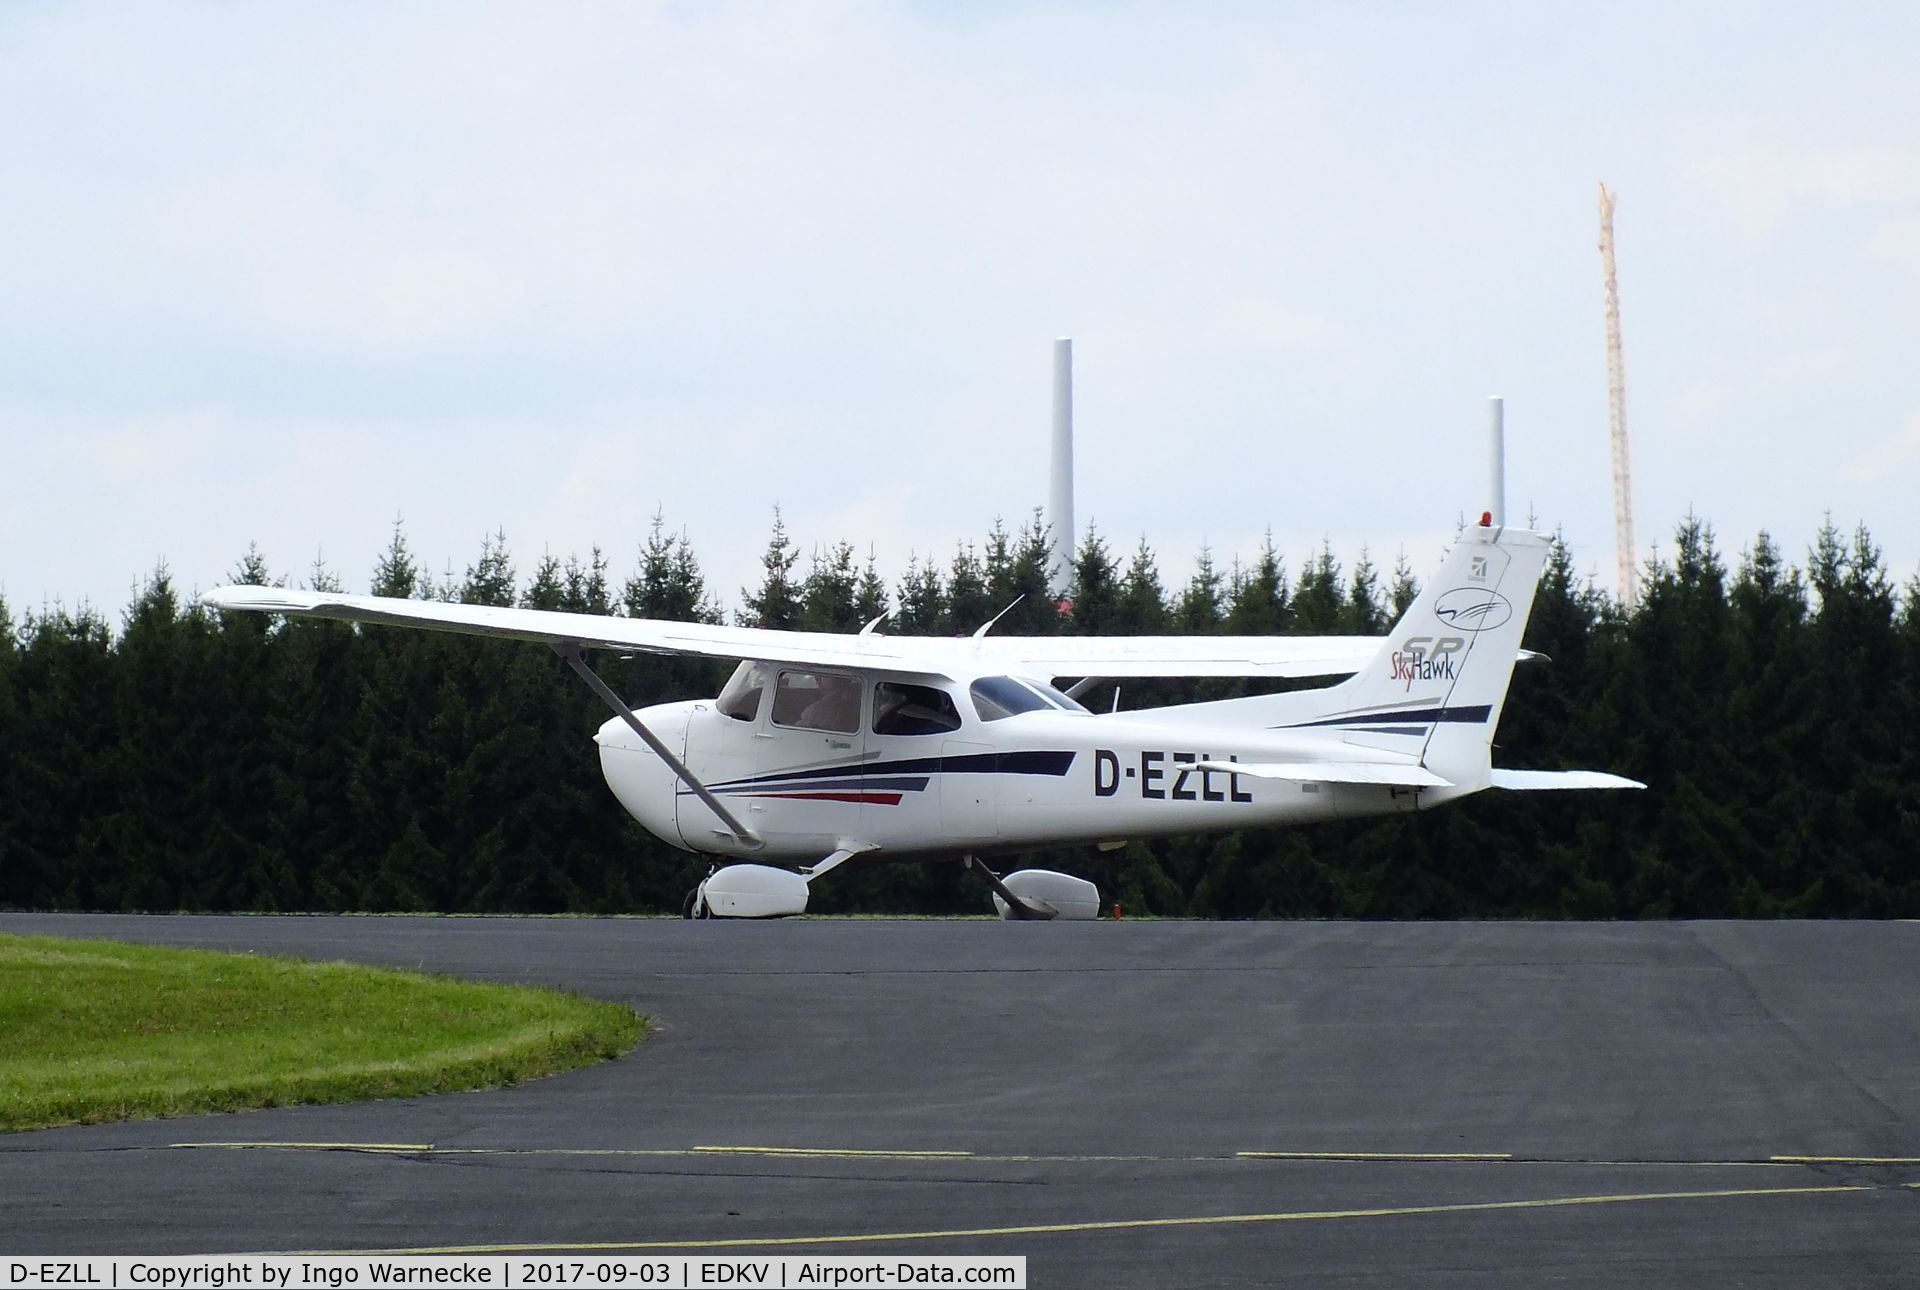 D-EZLL, Cessna 172S C/N 172S-9147, Cessna 172S at the Dahlemer Binz 60th jubilee airfield display